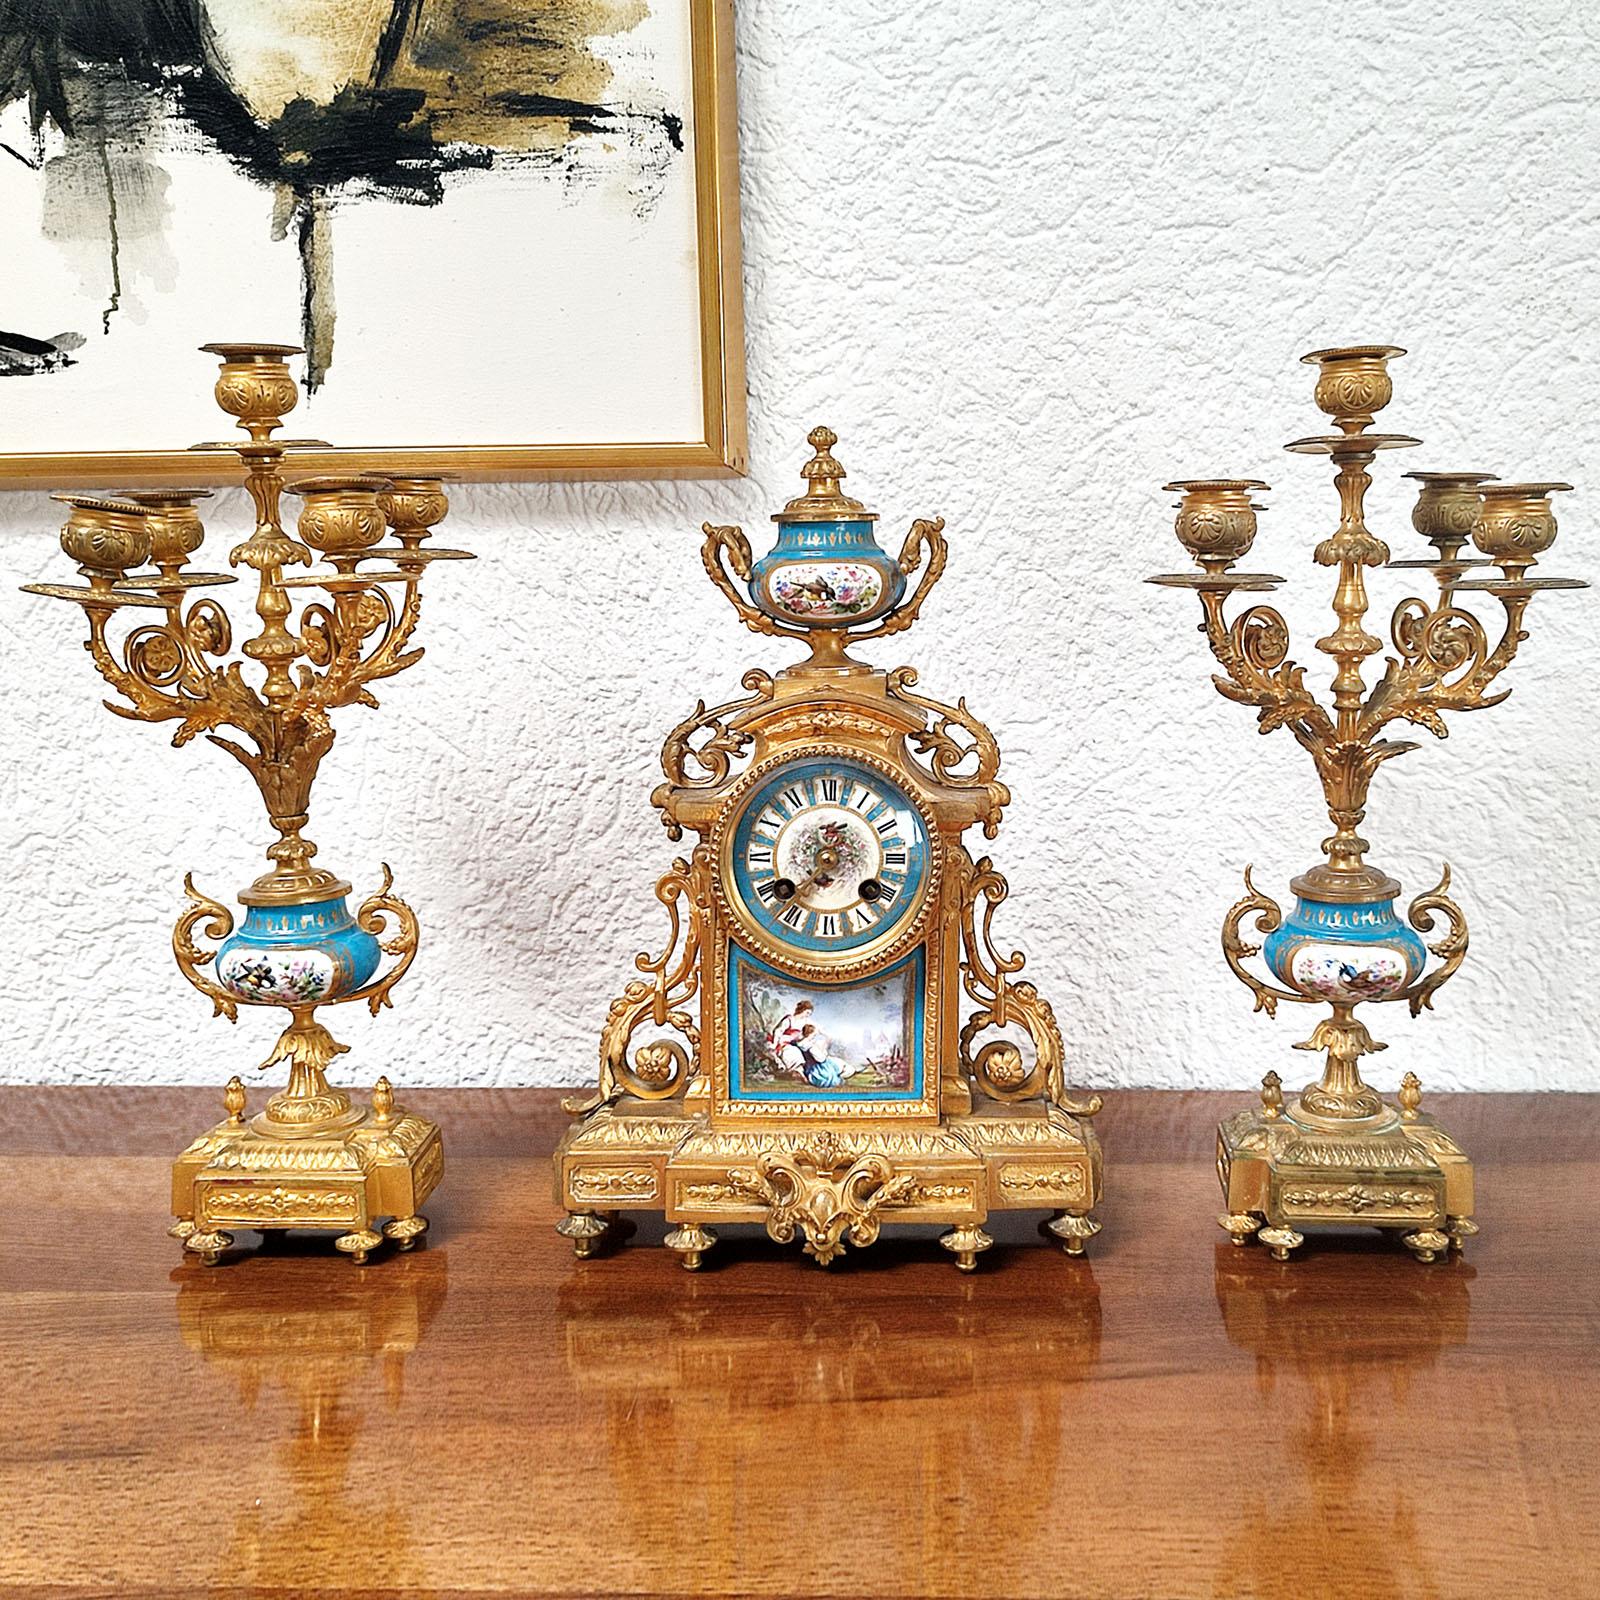 Louis XVI French Ormolu and Porcelain Mantle Clock and Pair of Candelabra, 19th Century